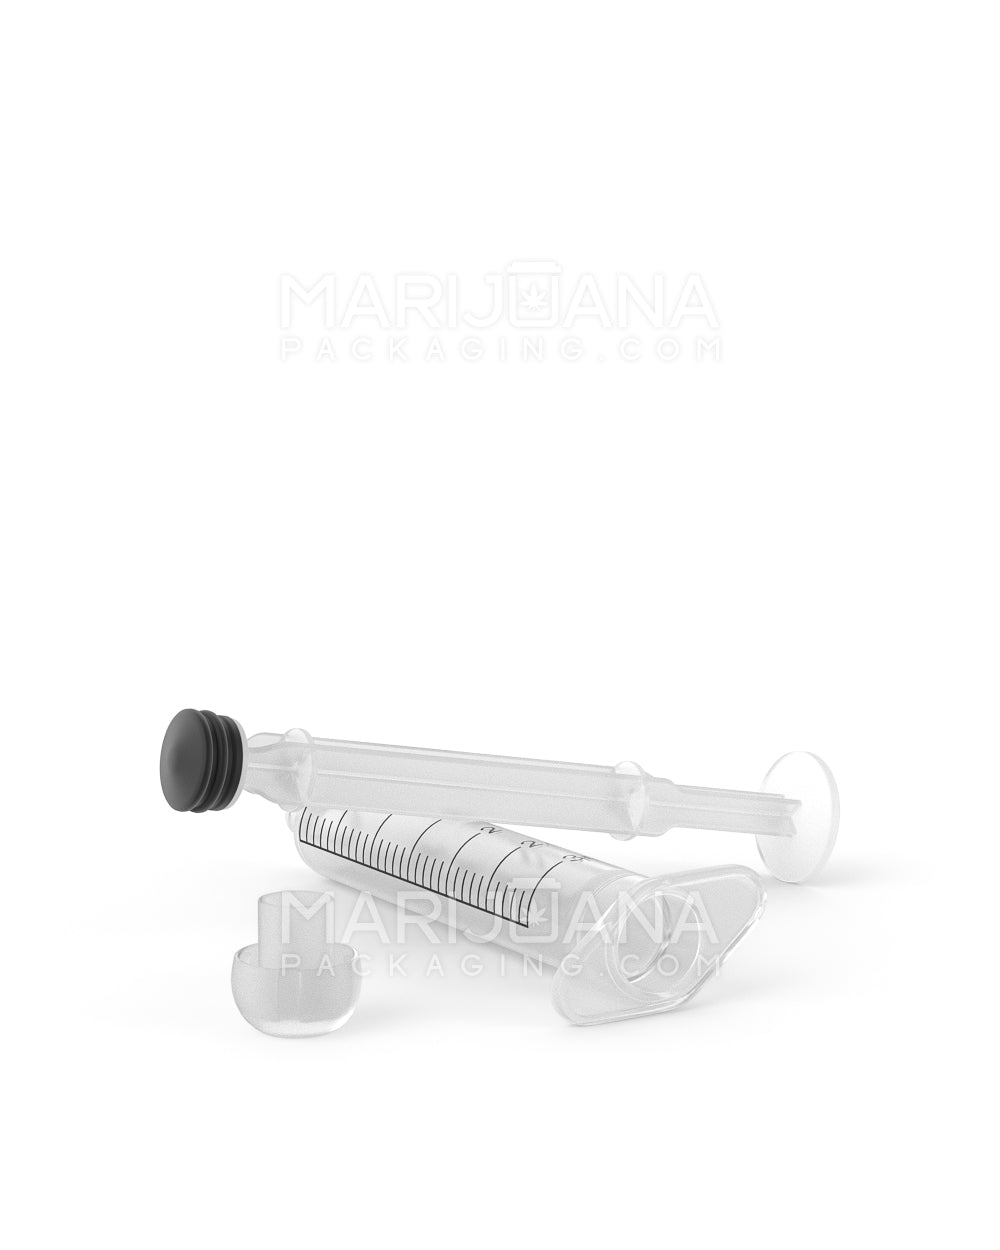 Plastic Oral Concentrate Syringes | 3mL - 0.5mL Increments - 100 Count - 5